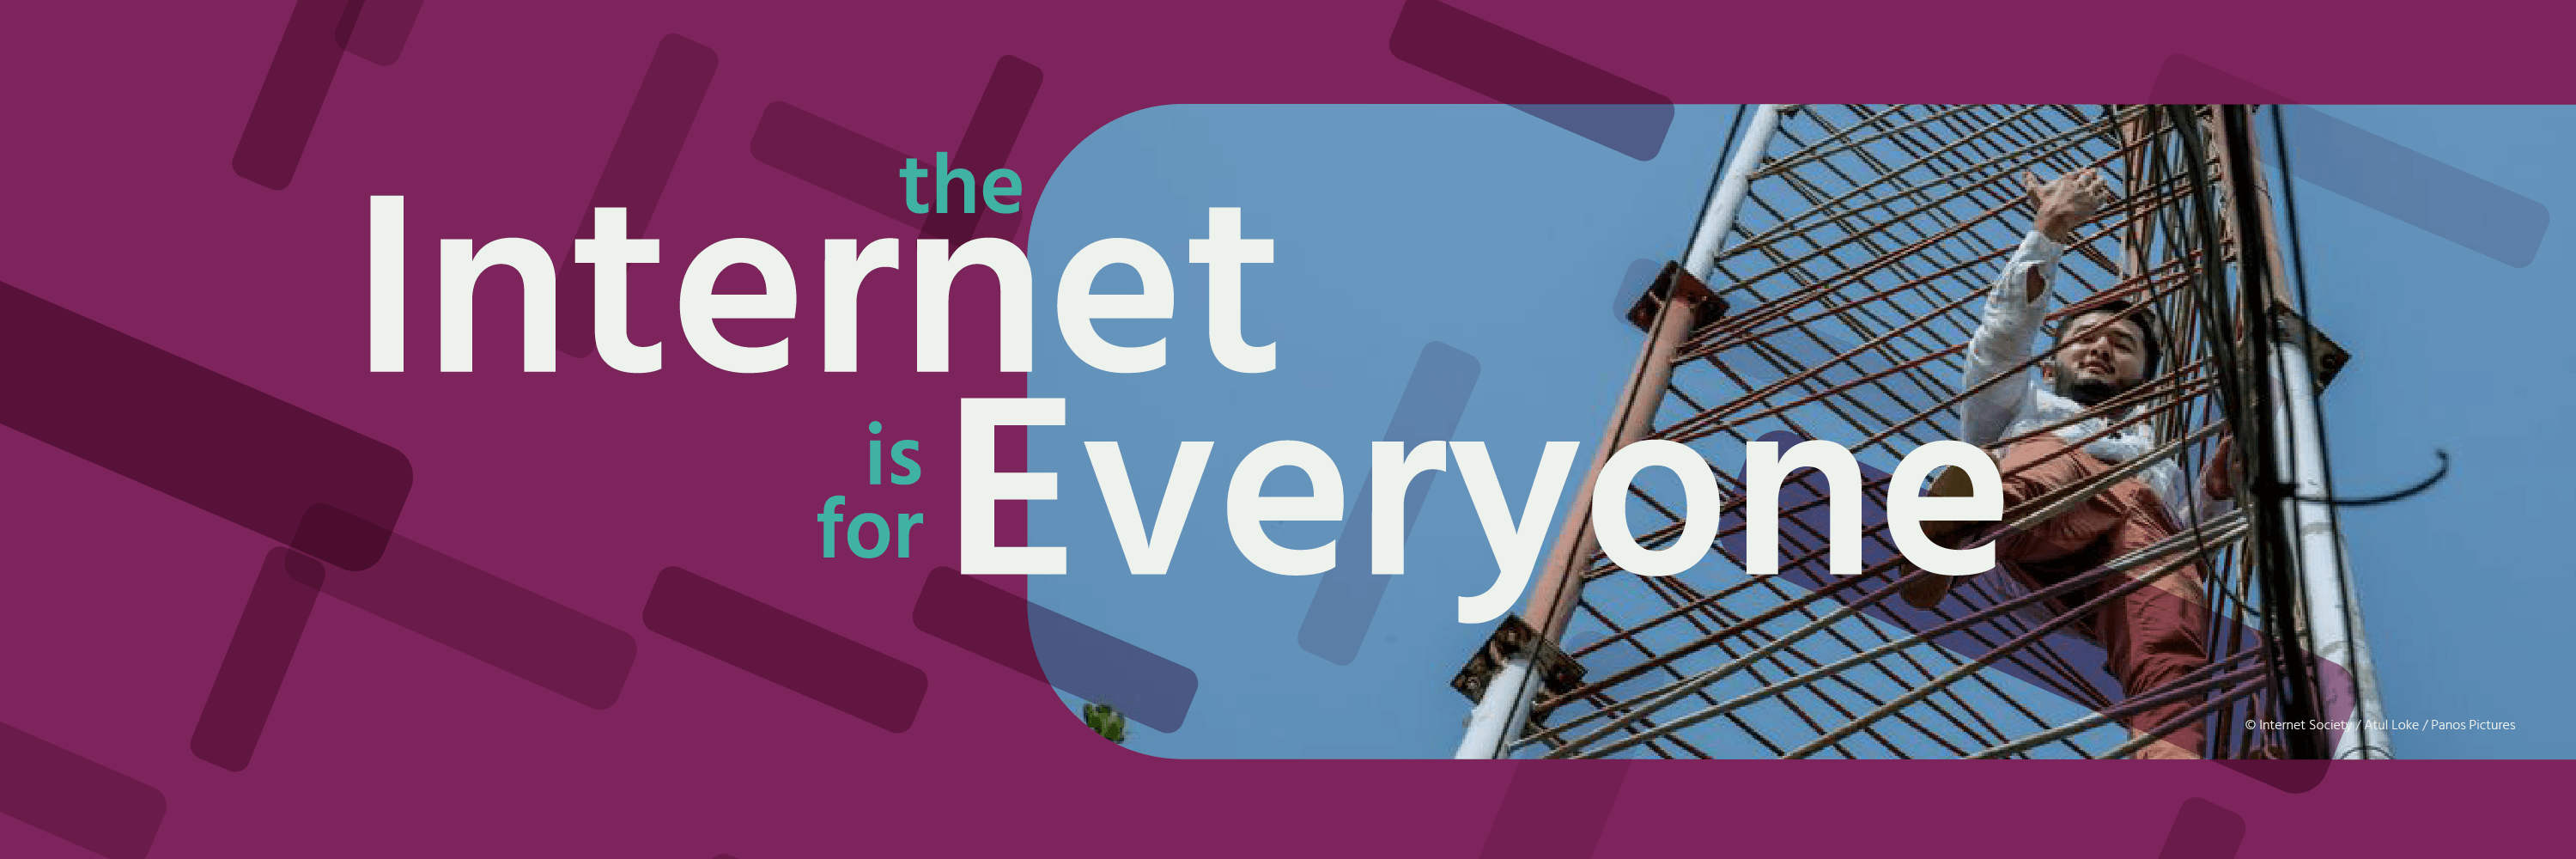 The Internet is for Everyone